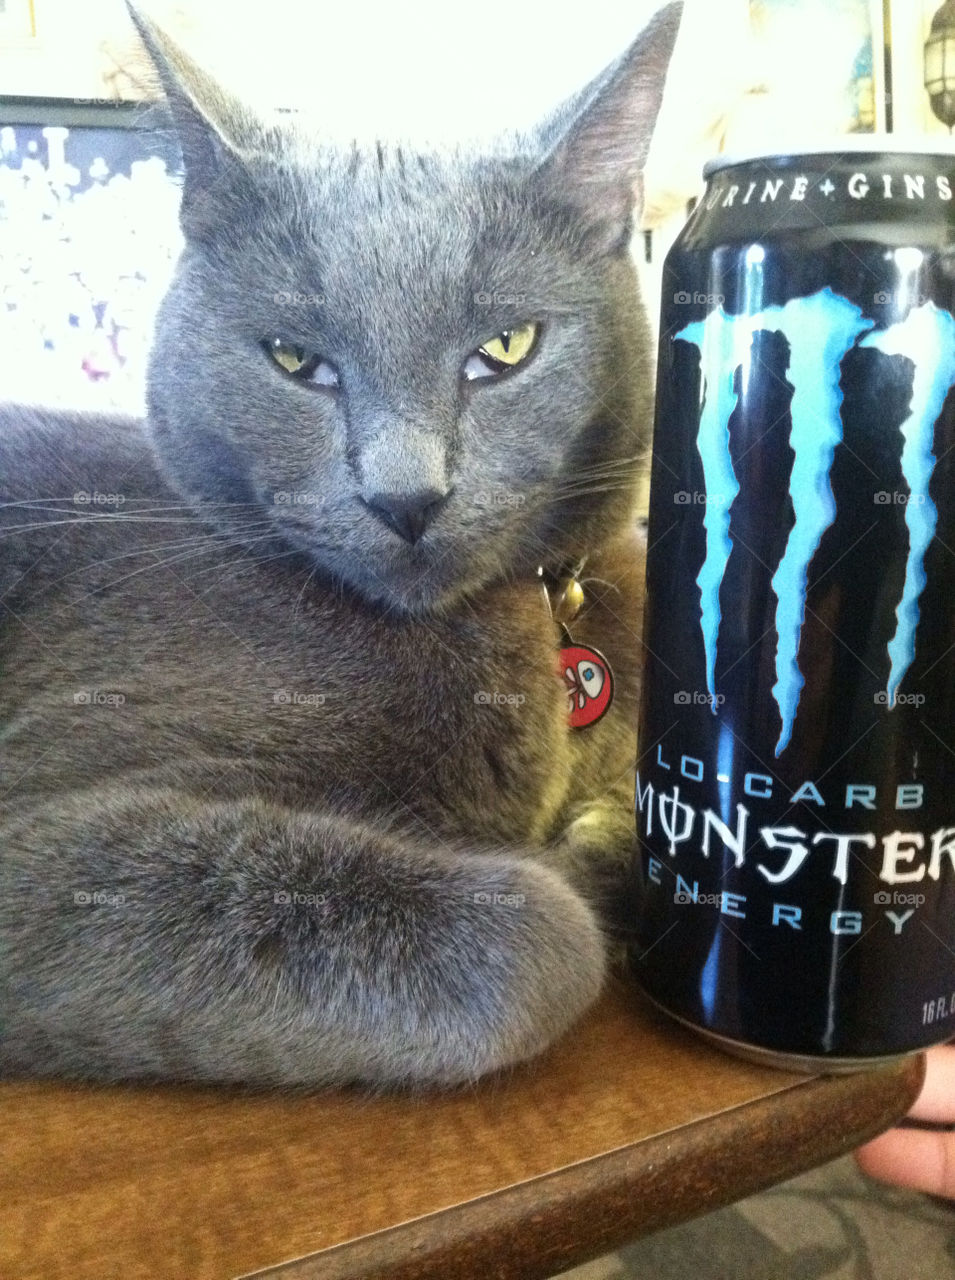 Monster cat . While drinking my monster energy, he decides to sit next to it. Therefore, I couldn't drink it anymore. 